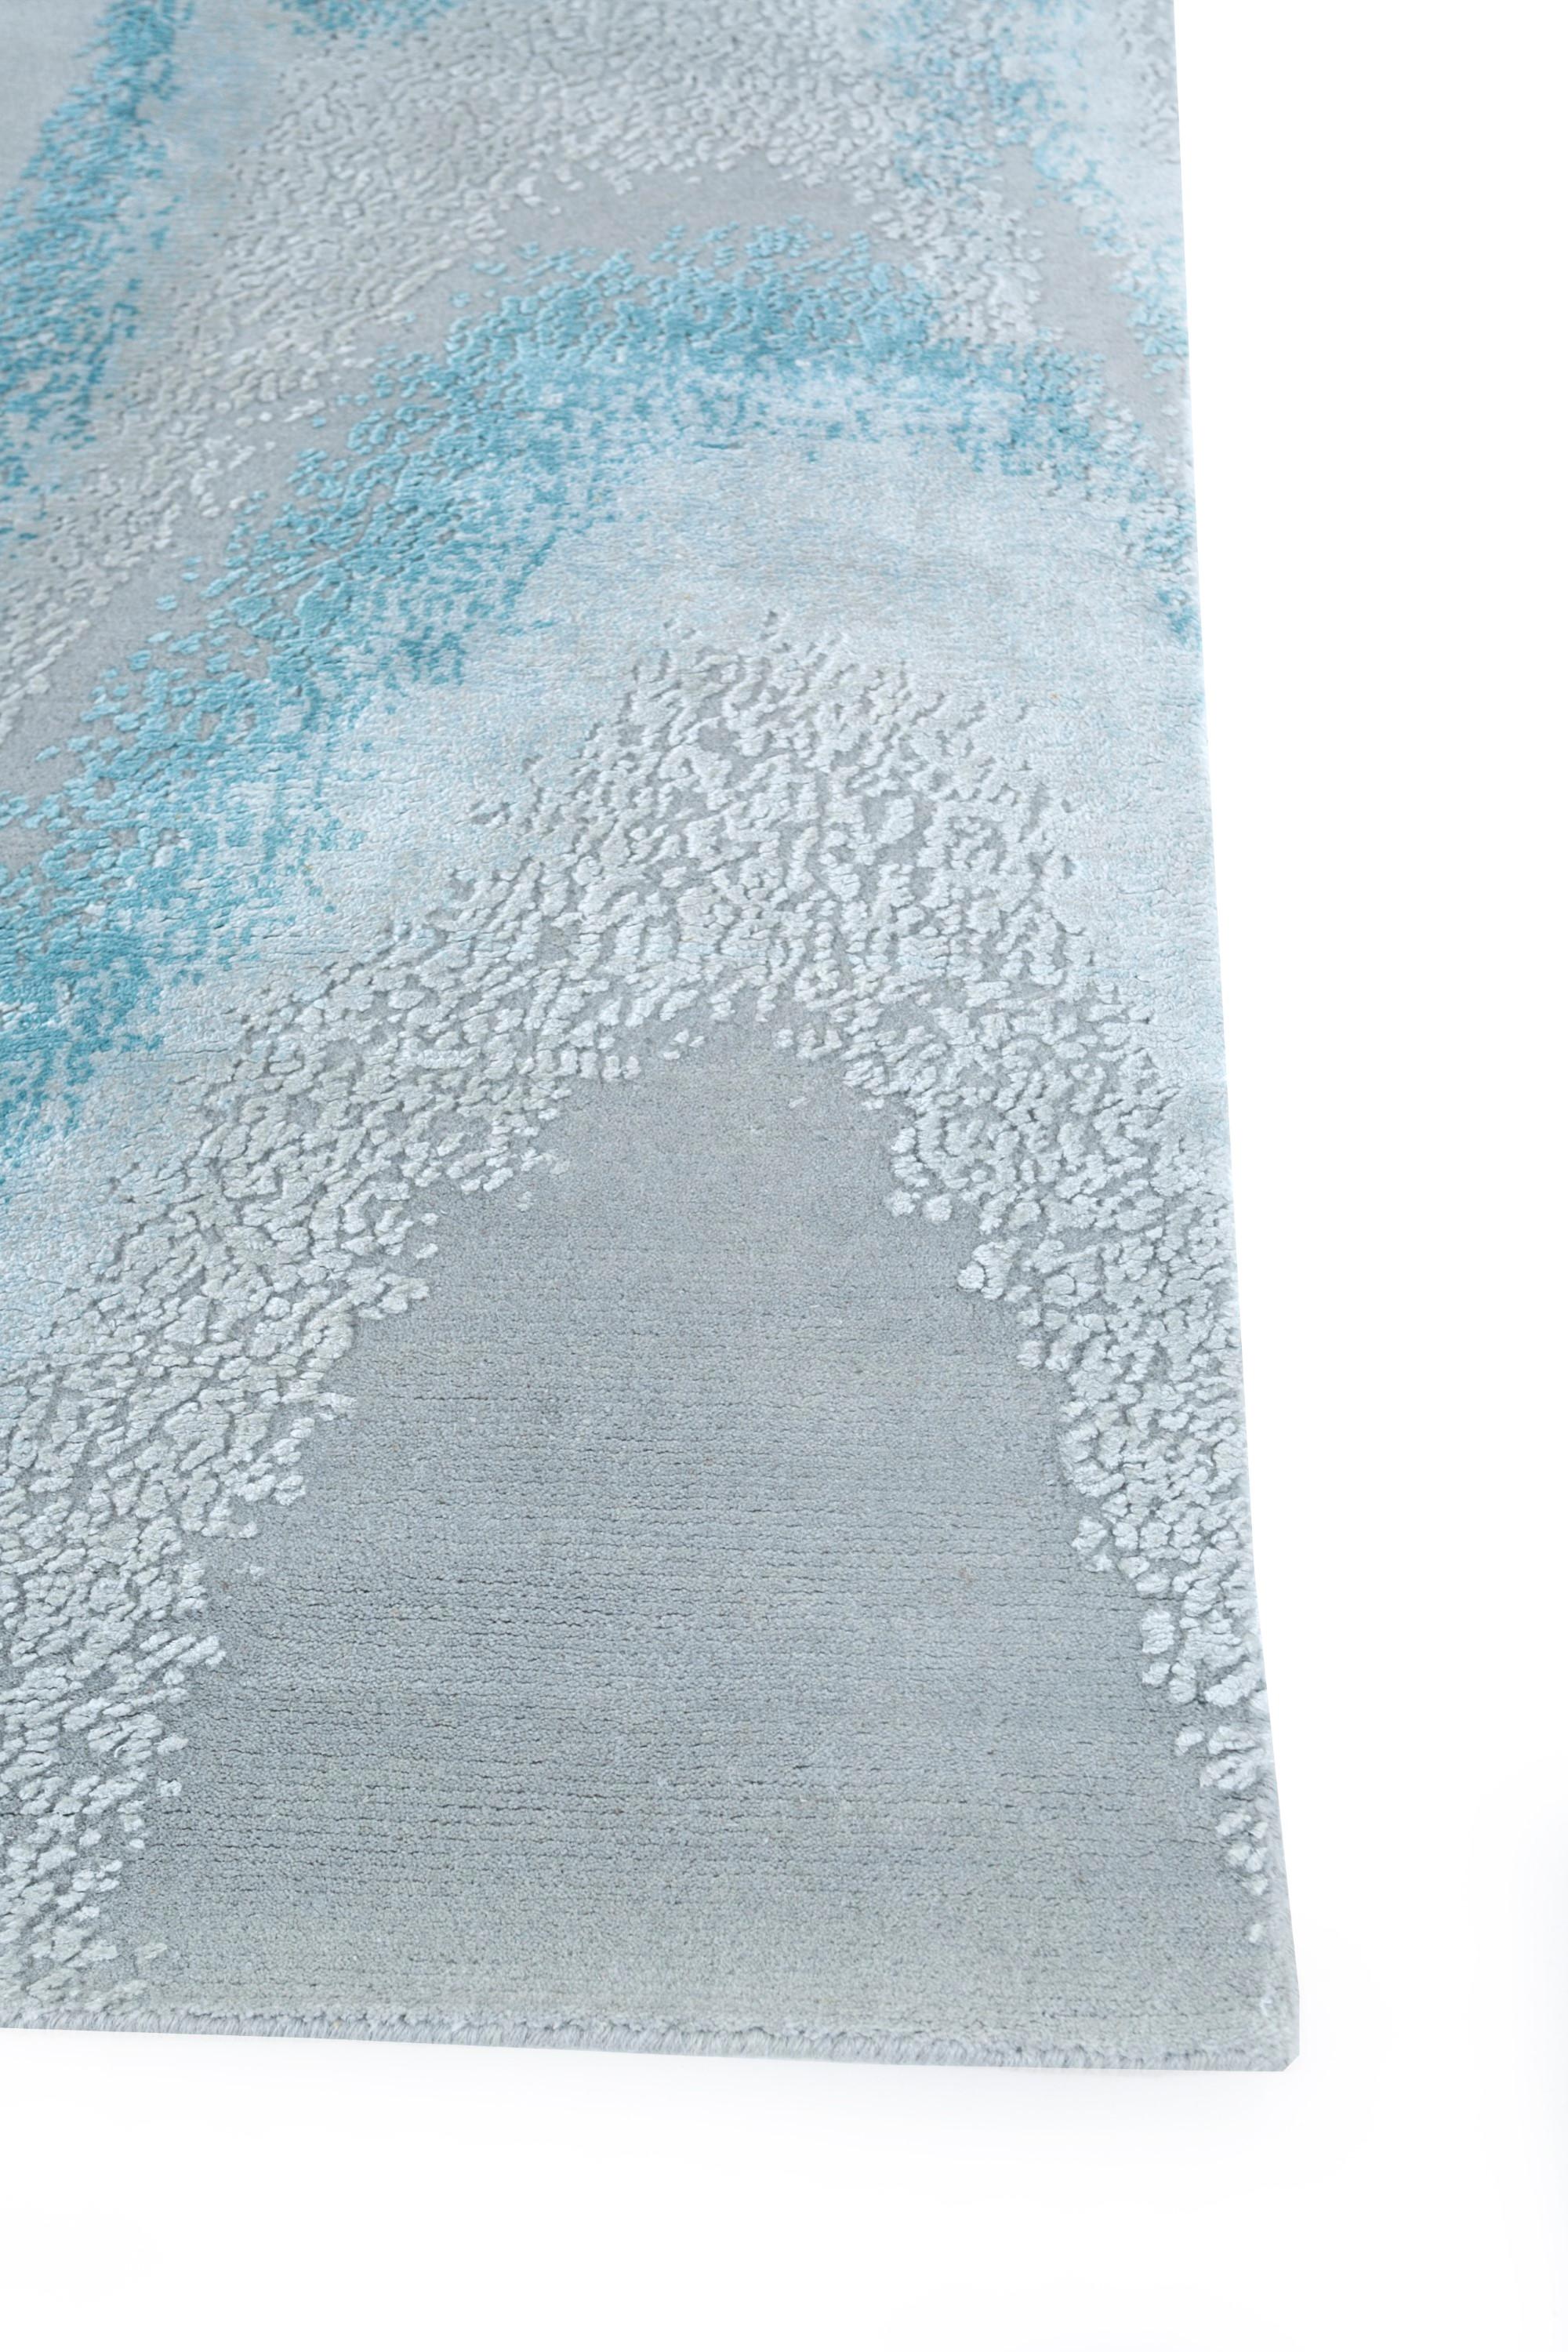 Mid-Century Modern Gilded Waves Sea Blue & Gold 300x420 cm Hand Knotted Rug For Sale